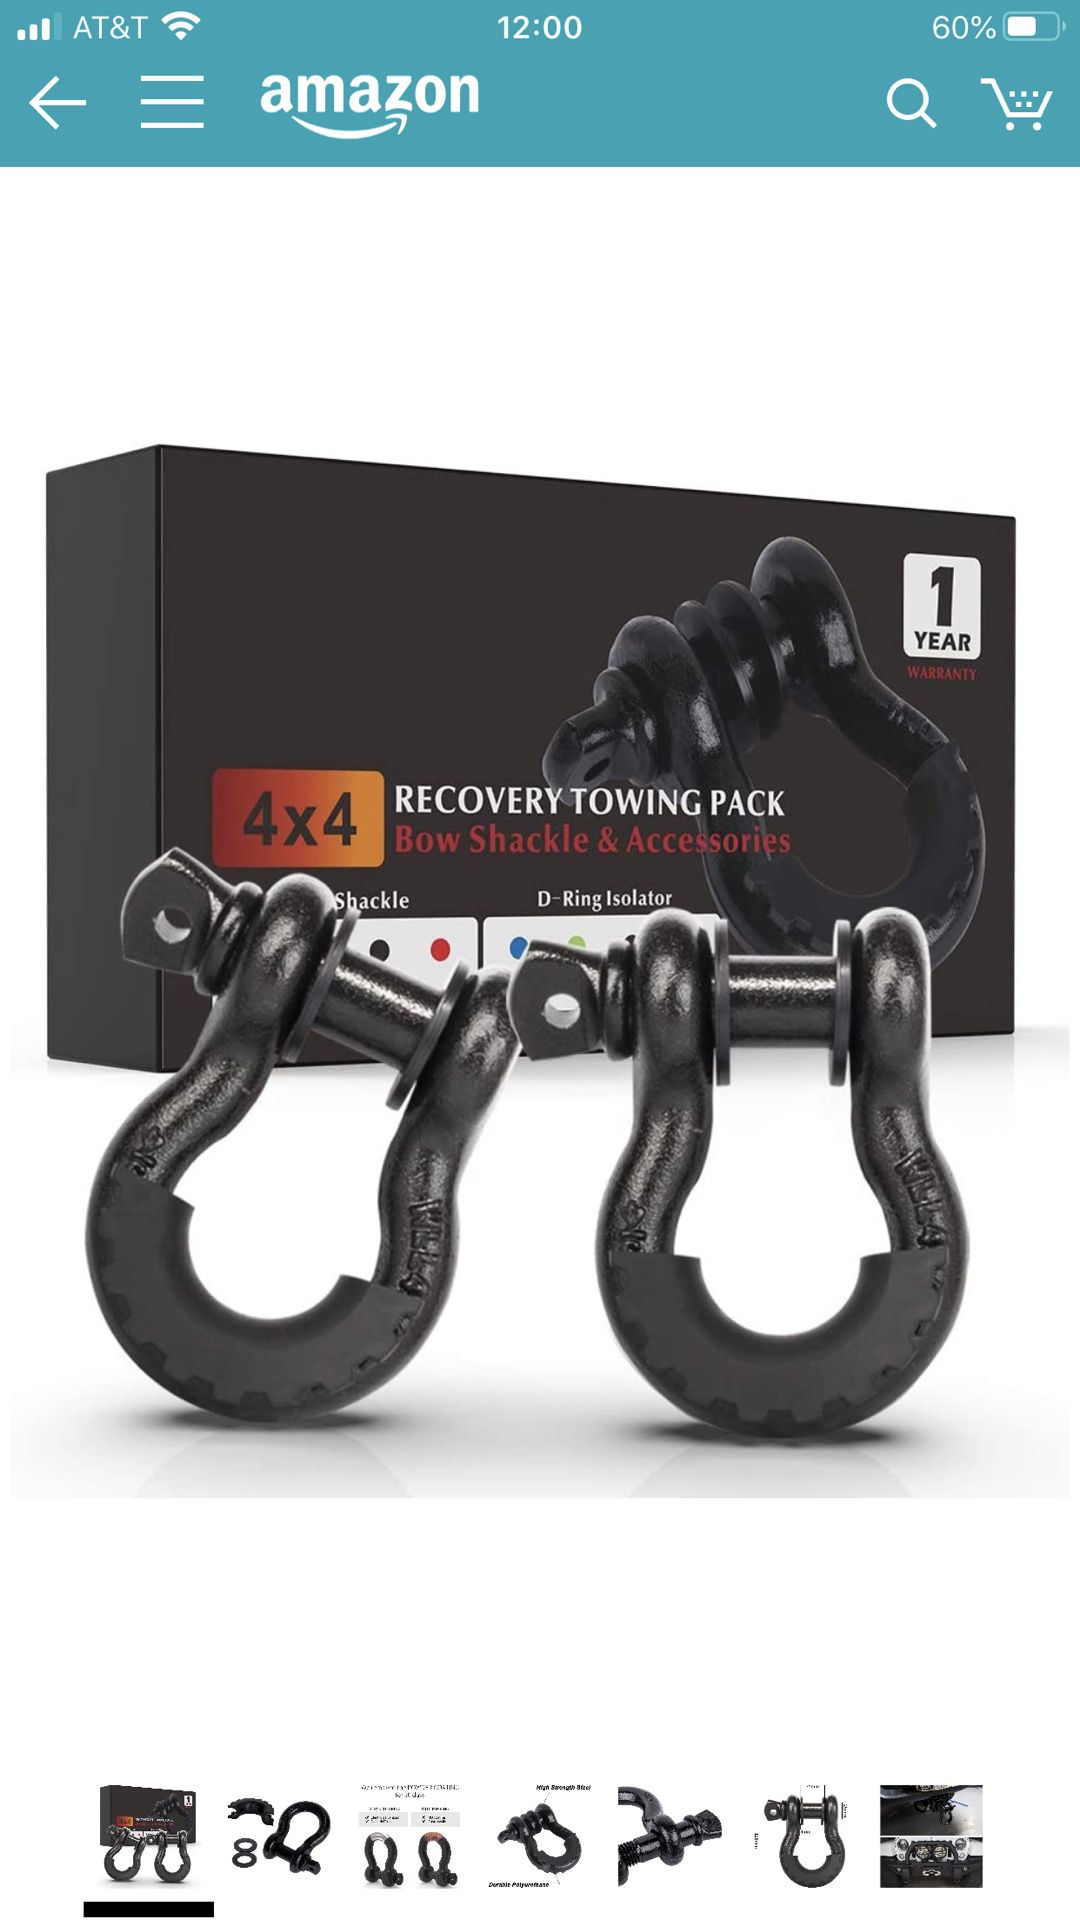 FieryRed 3/4" D Ring Shackle (2 Pack) 22,046Ibs Break Strength with 7/8" Locking Pin and Black Isolator & Washer Kits for use With Tow Strap, Winch &